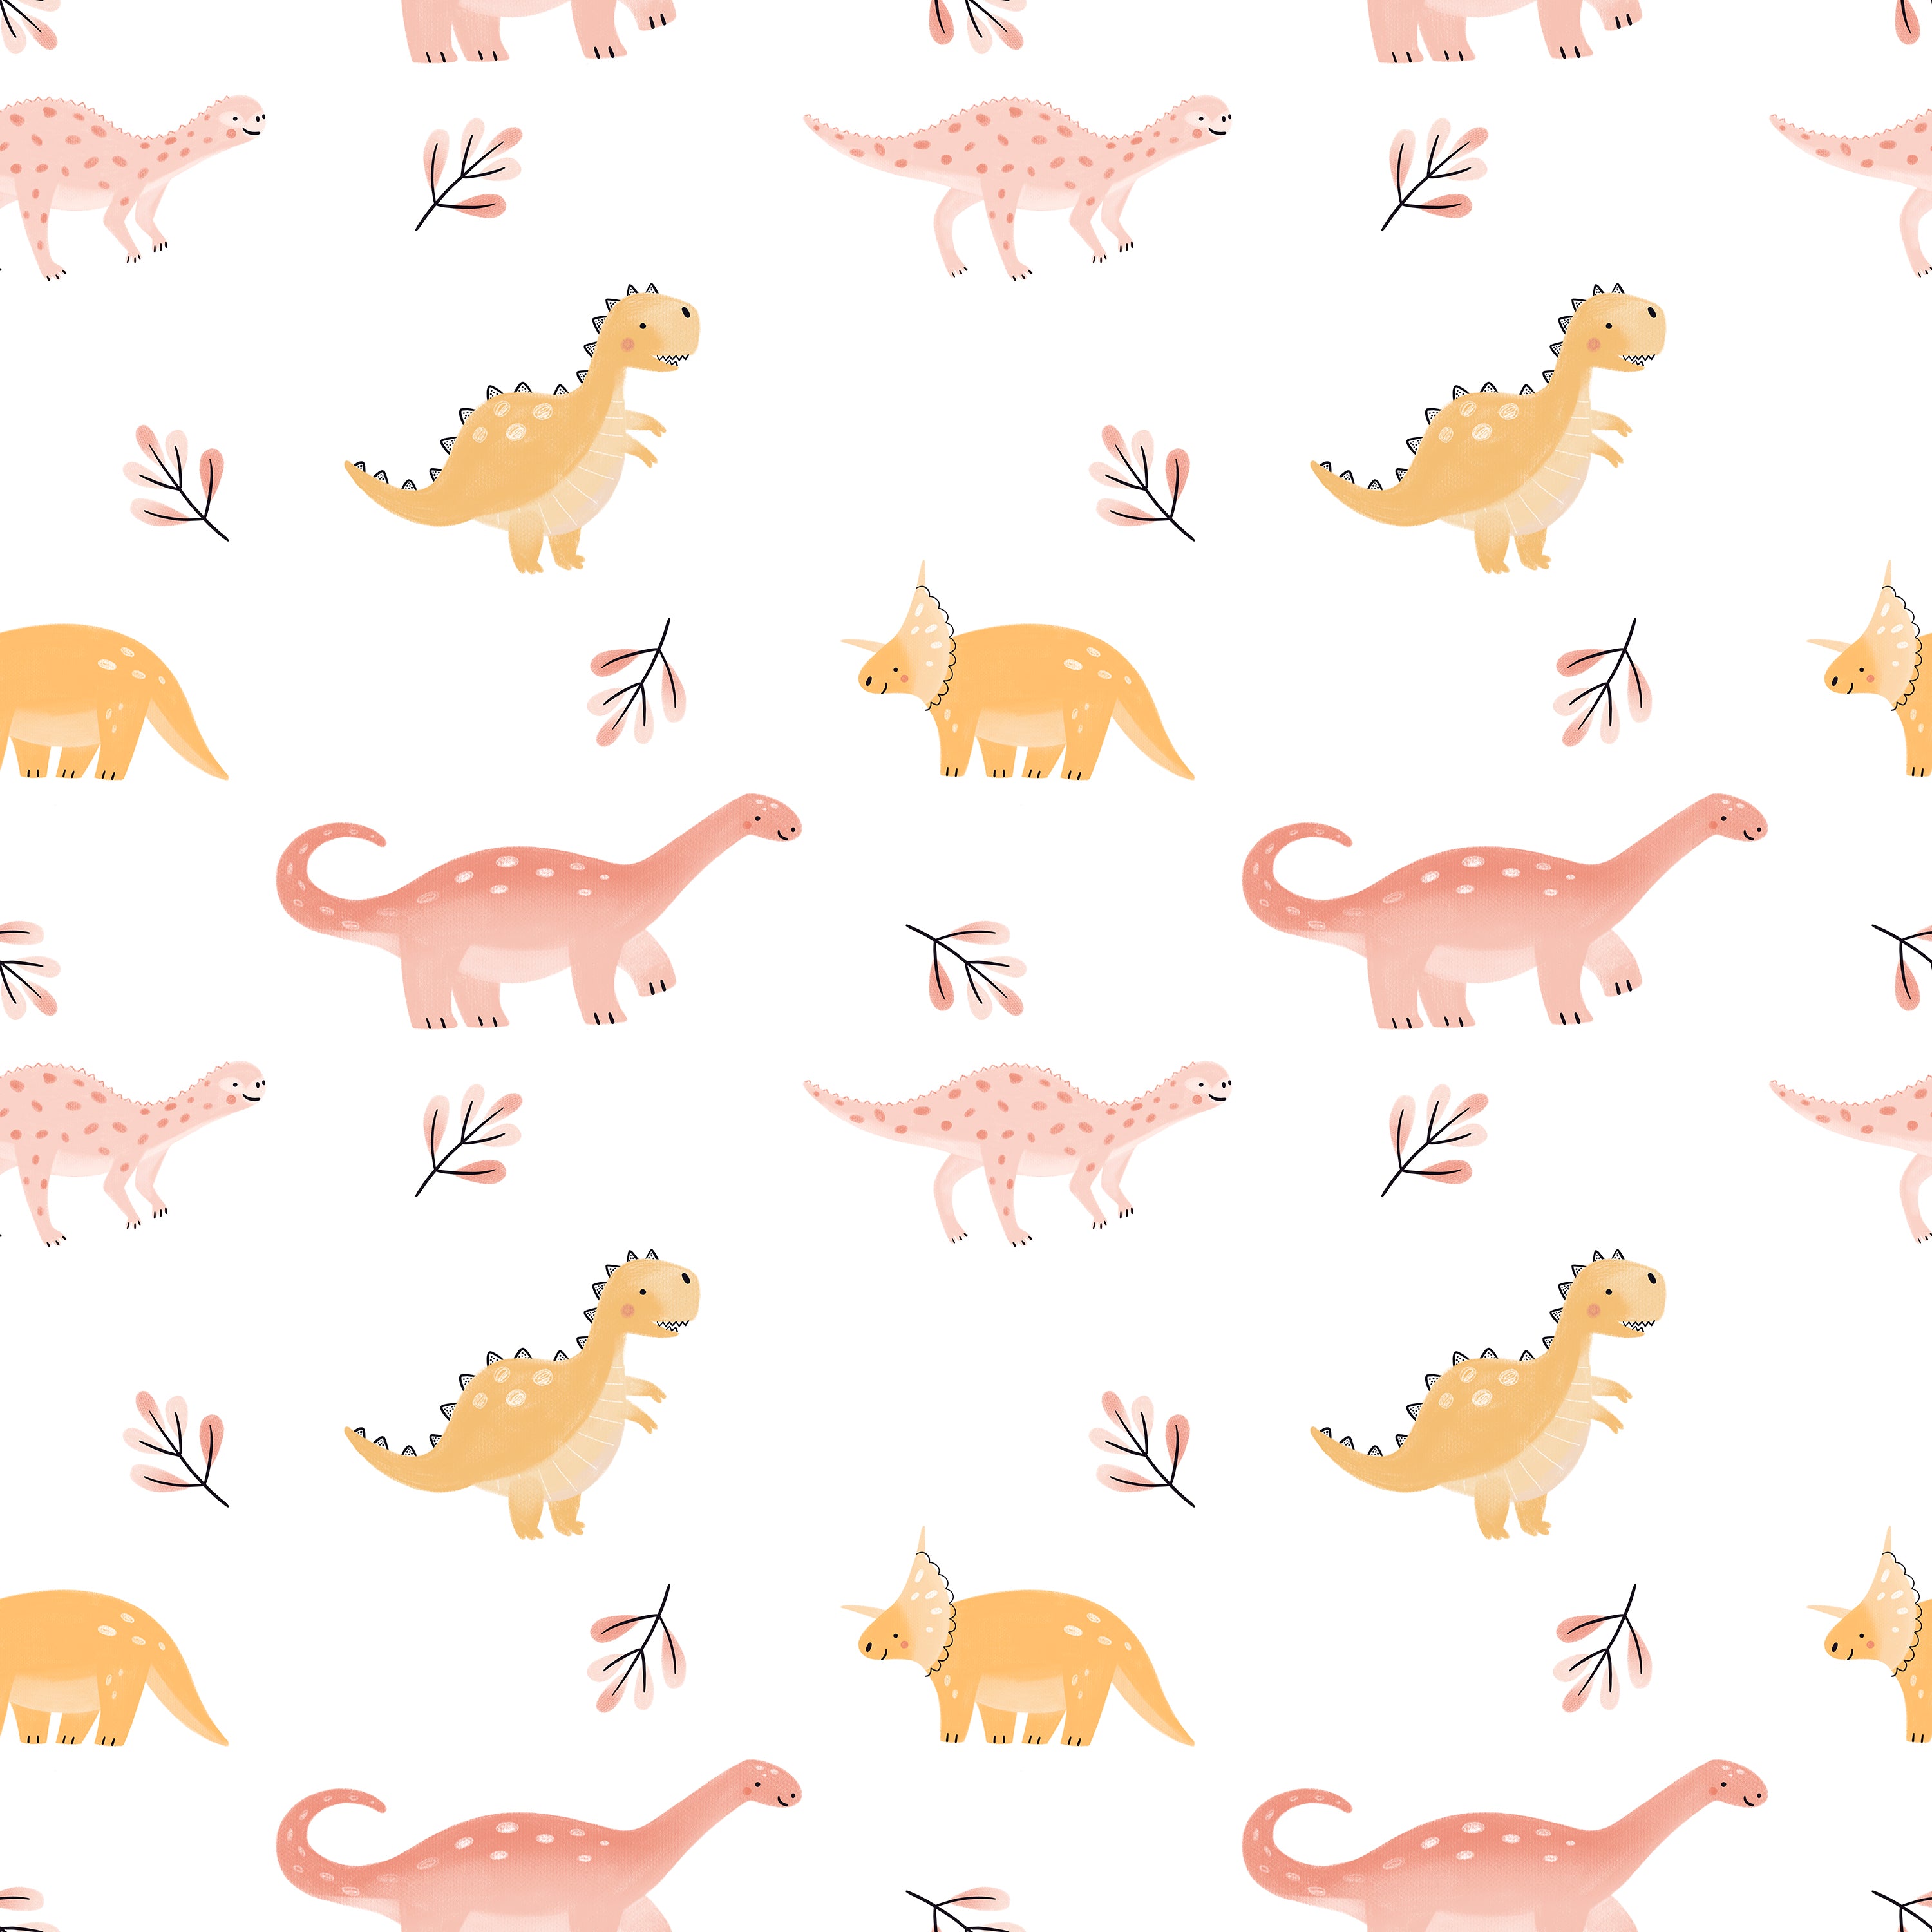 Seamless pattern of "Dino Days Wallpaper III" featuring cute, cartoon-style dinosaurs in shades of pink, yellow, and green on a white background. The dinosaurs are interspersed with small plant motifs, creating a playful and educational atmosphere perfect for children's rooms.